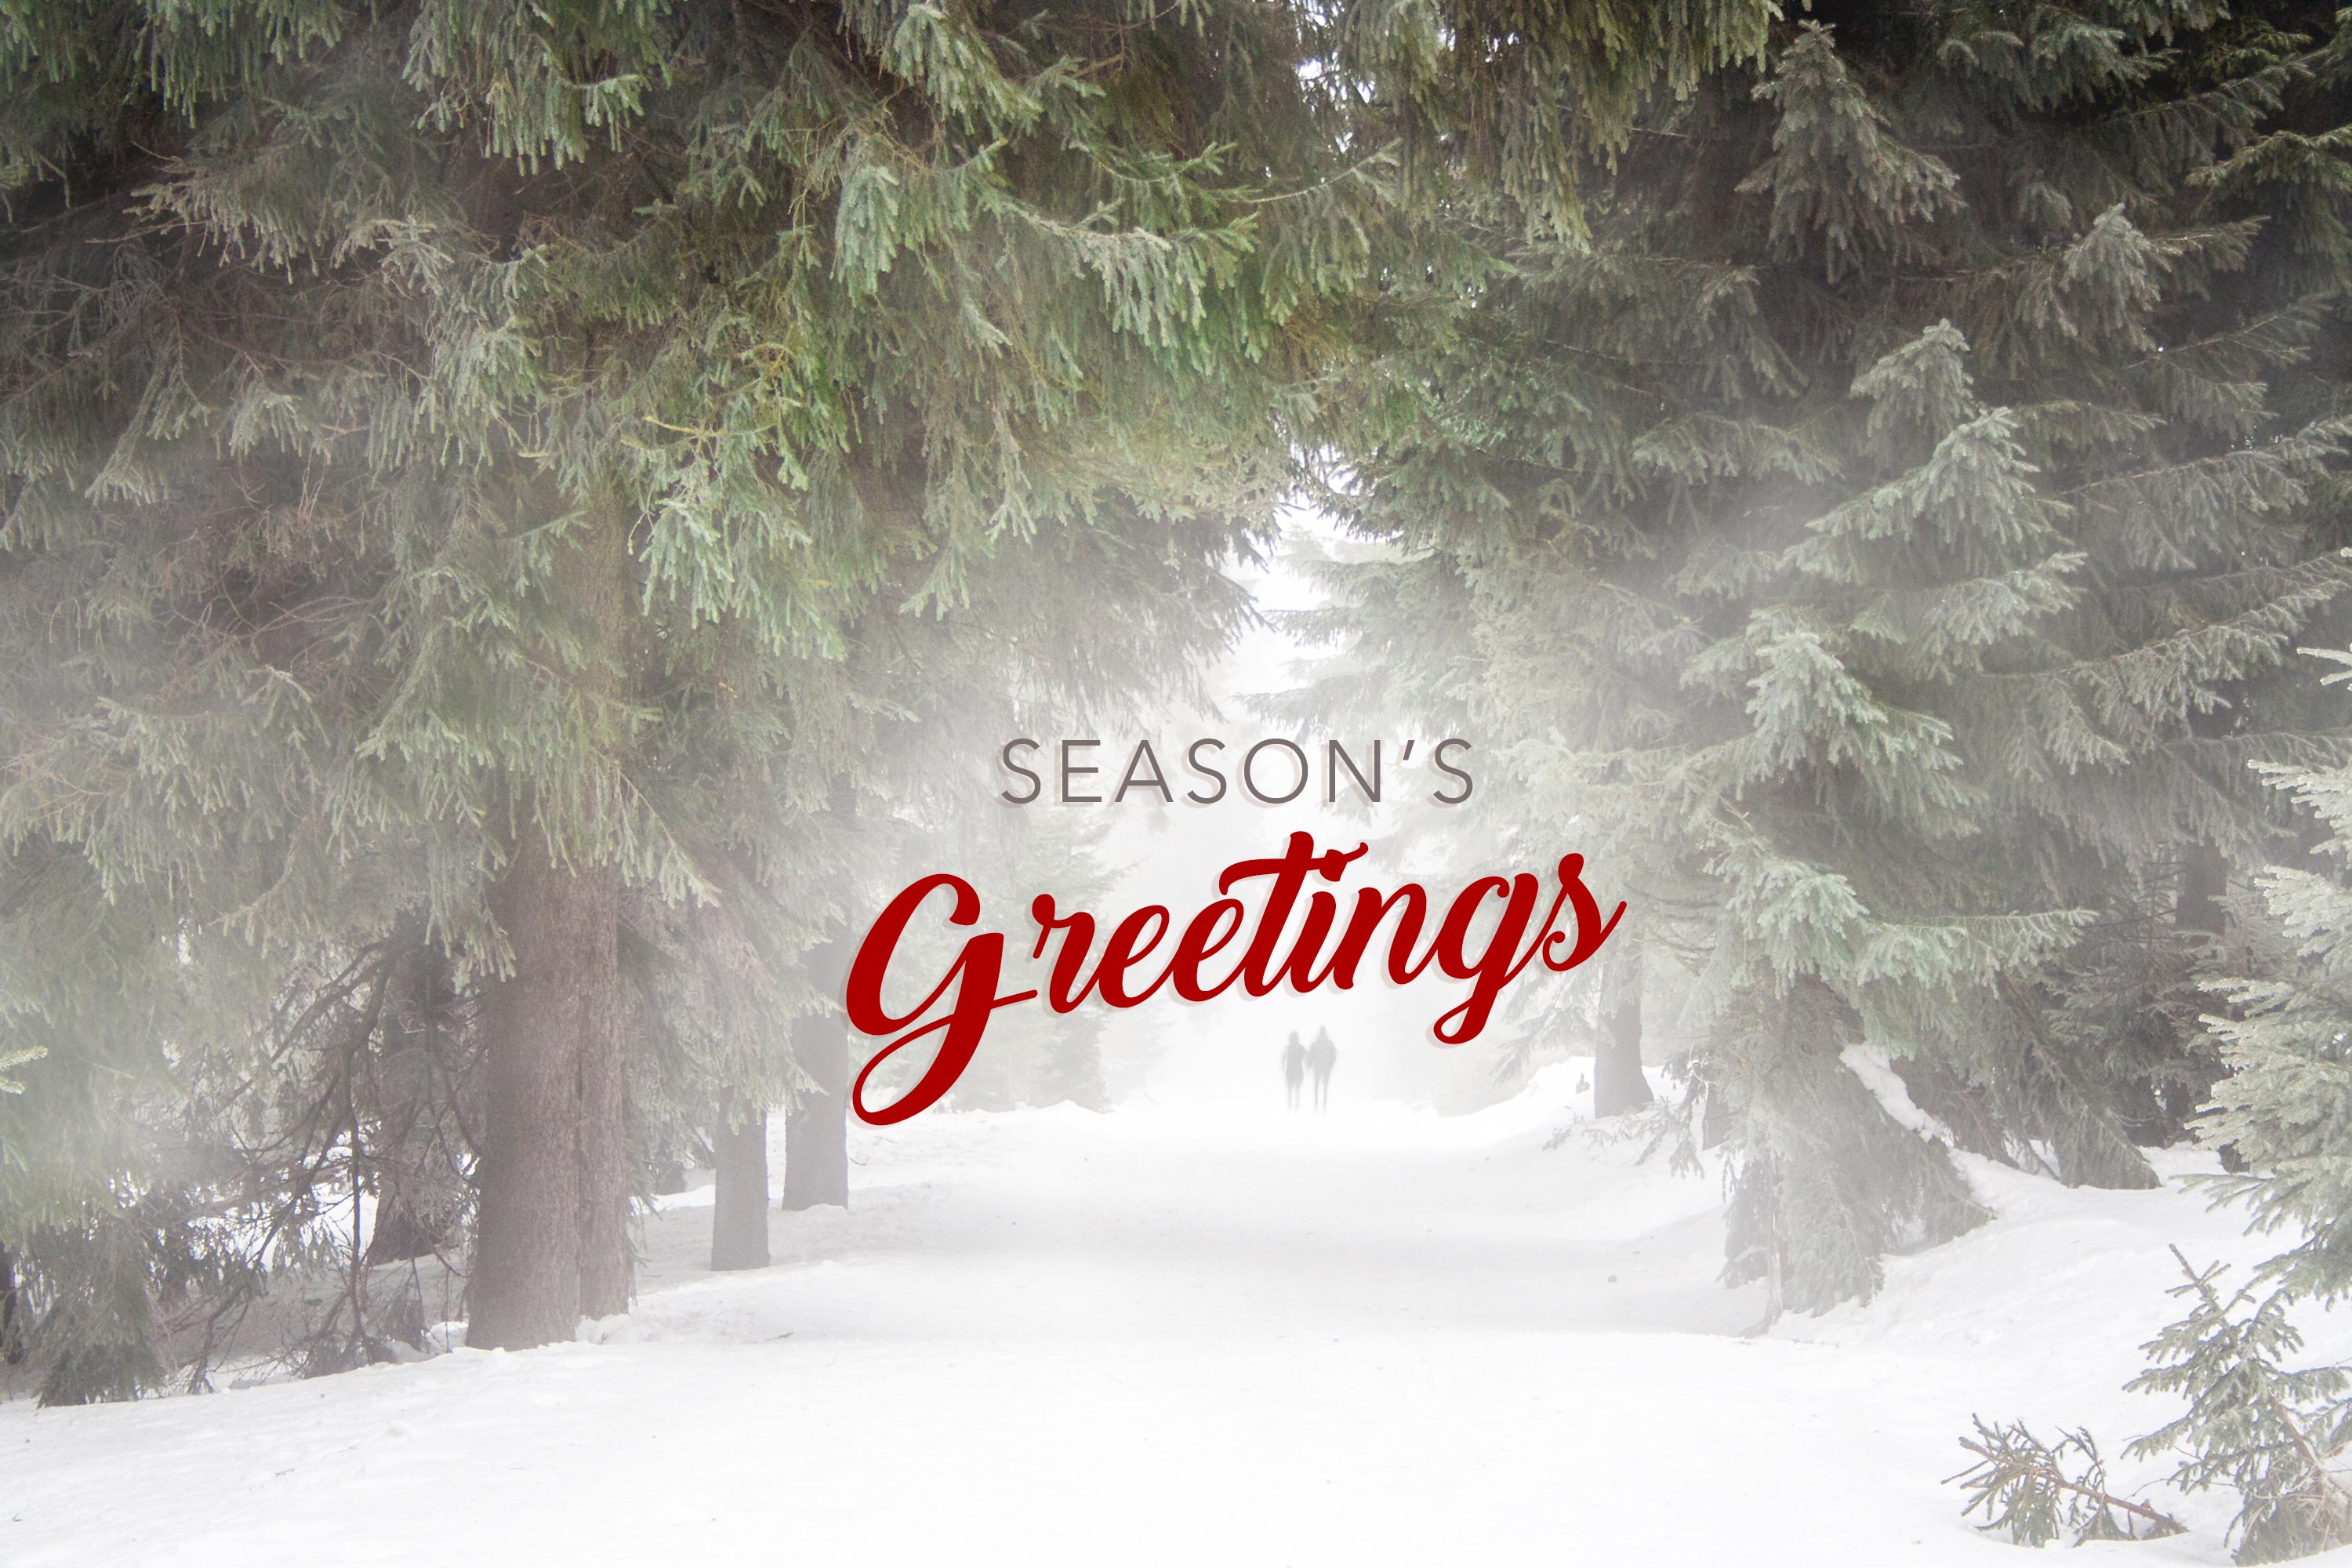  download 15 Seasons Greetings Cards Stock Images HD 3000x2000